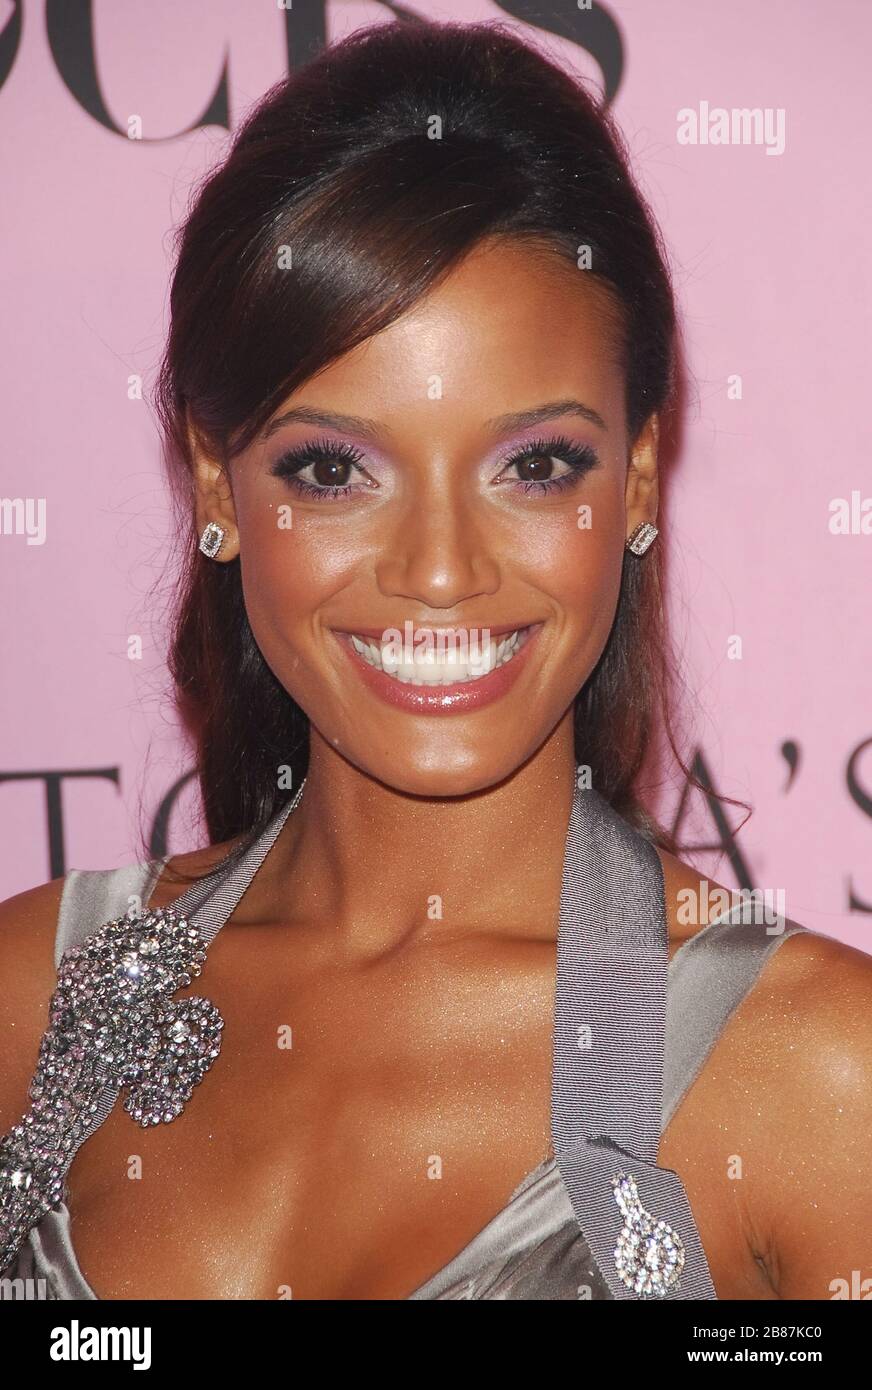 Selita Ebanks at the Victoria's Secret Fashion Show - Arrivals held at the Kodak Theater in Hollywood, CA. The event took place on Thursday, November 16, 2006.  Photo by: SBM / PictureLux - File Reference # 33984-9559SBMPLX Stock Photo